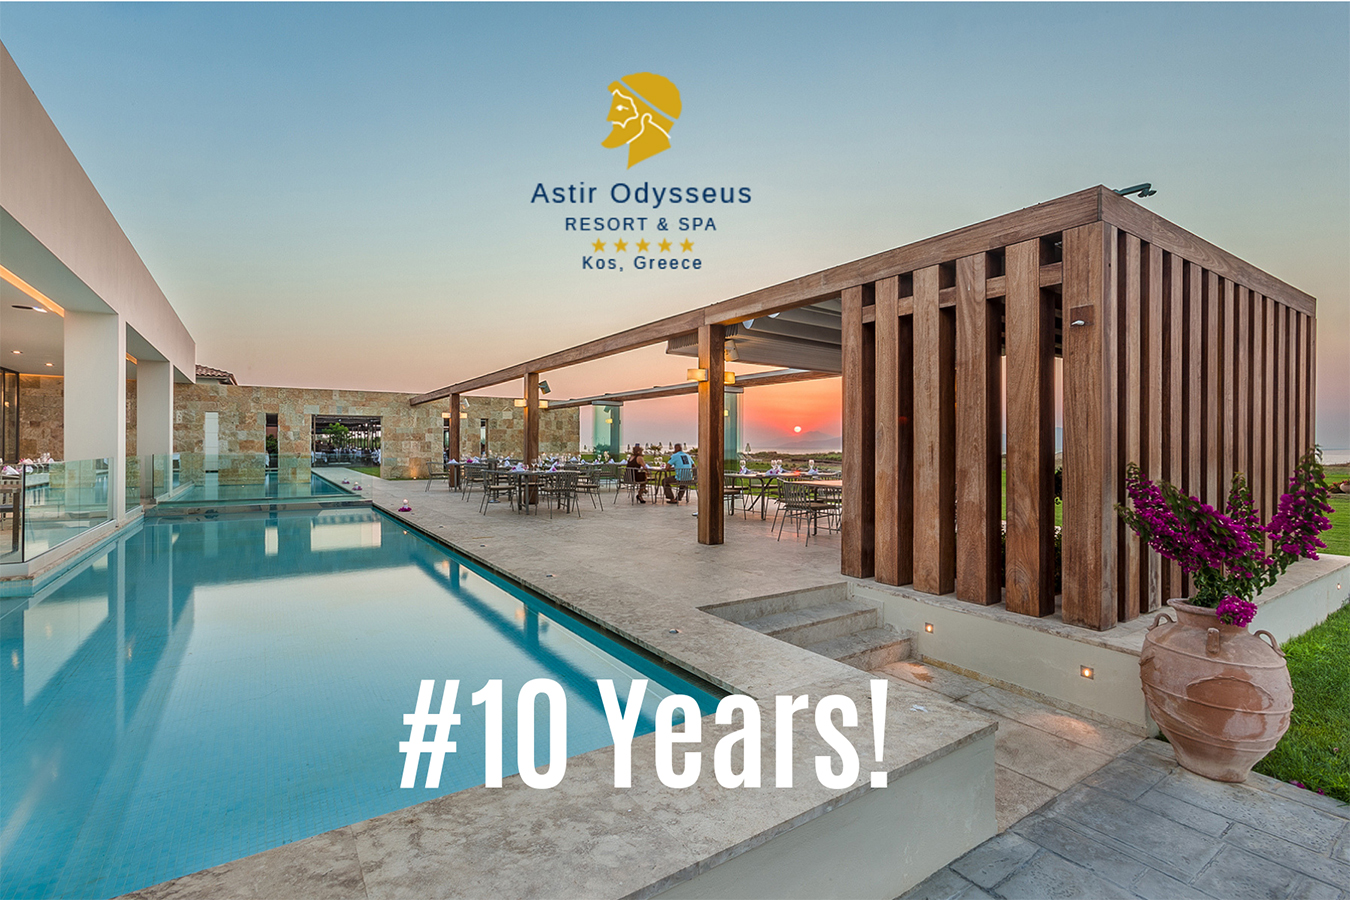 Celebrating 10 Years of Incomparable Hospitality at Astir Odysseus